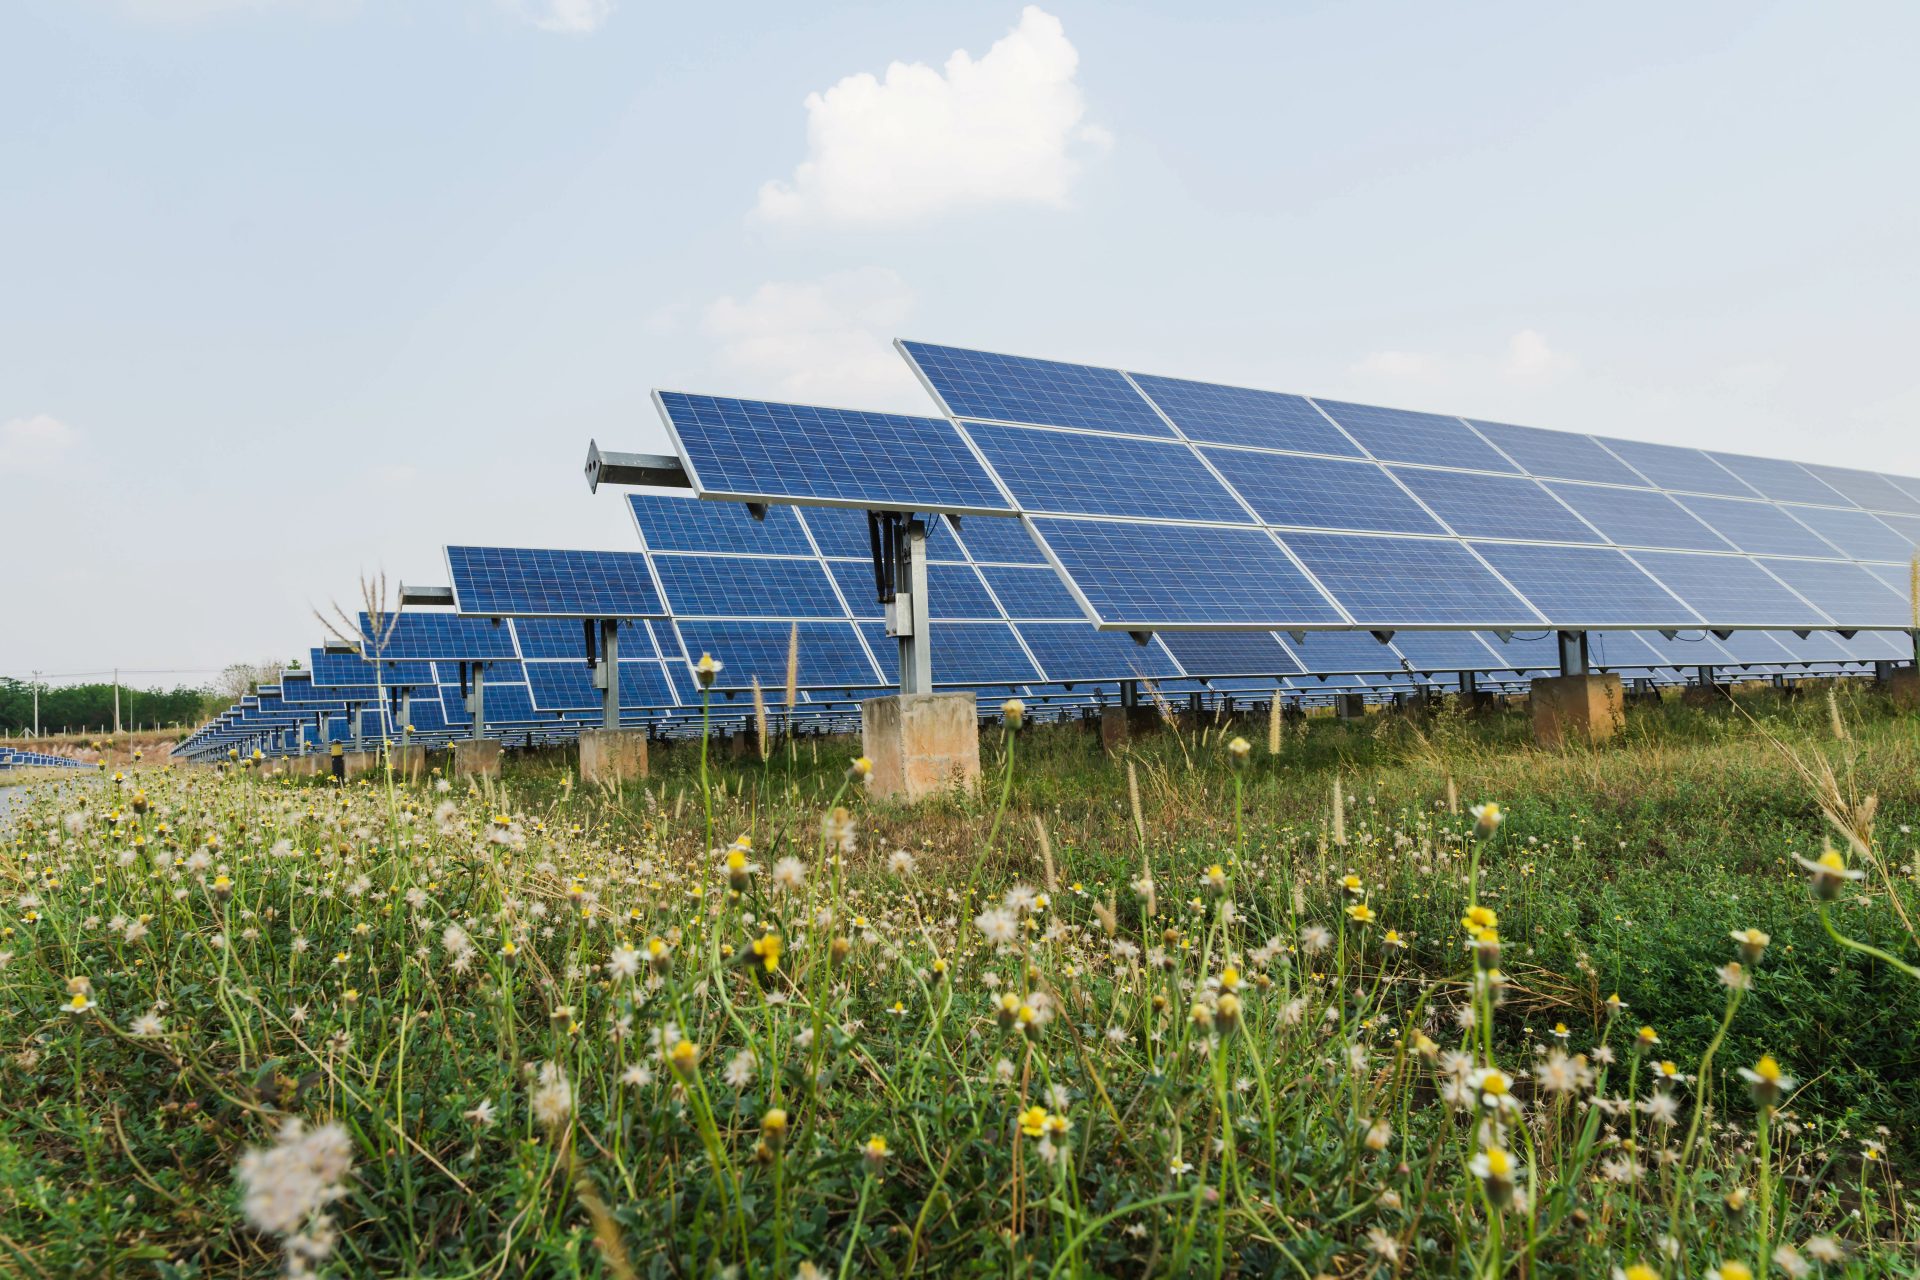 A solar park on a green meadow, flowers blooming.